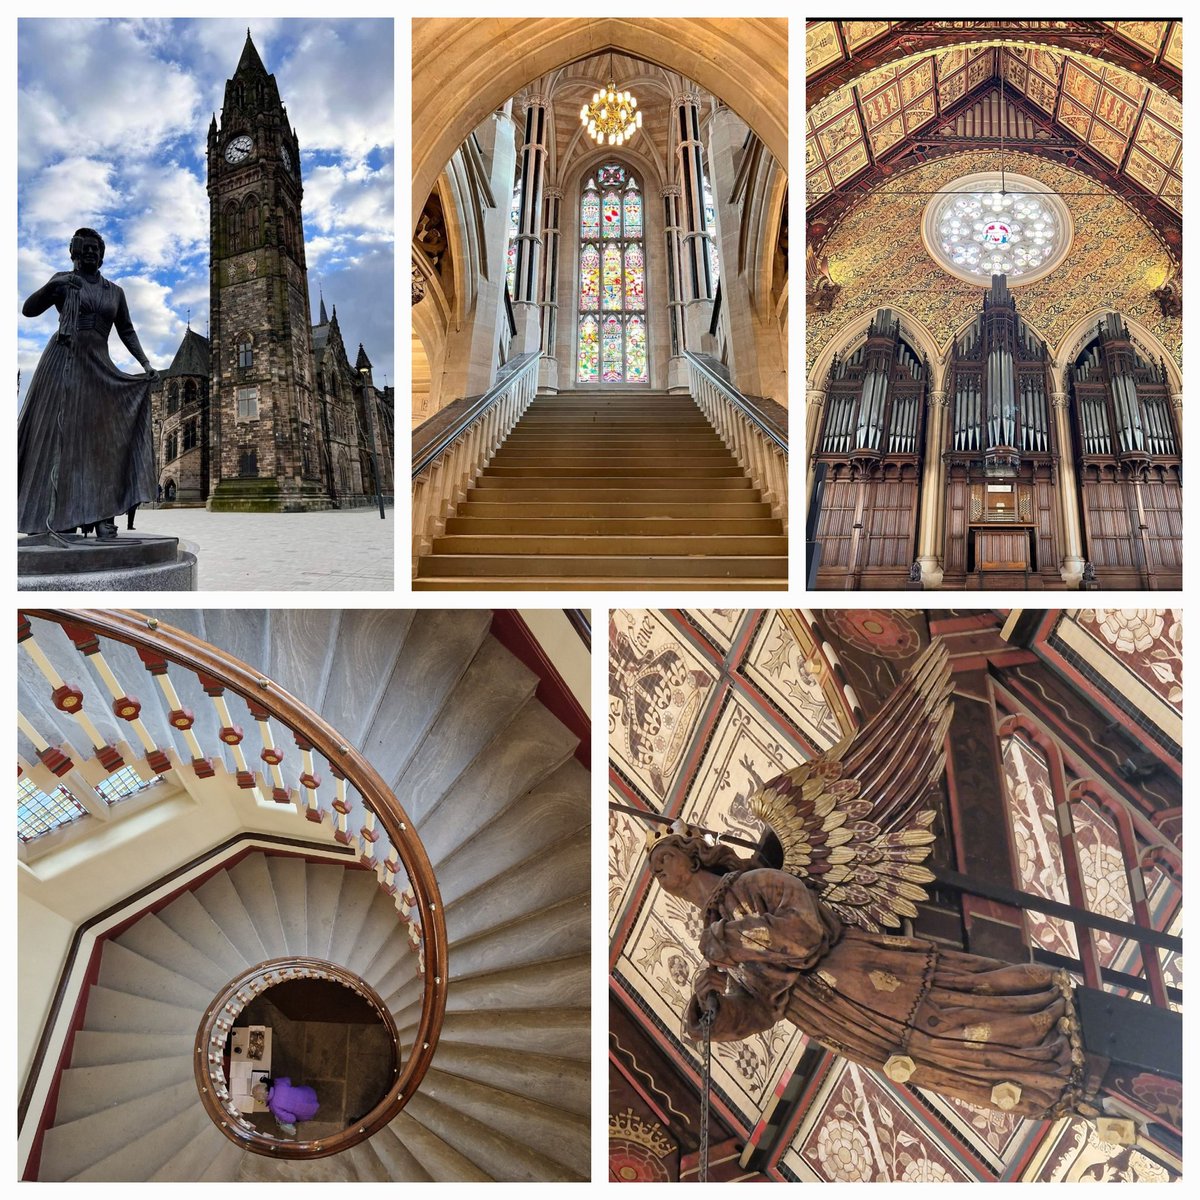 Got to see the multi million pound refurbishment of Rochdale Town Hall today...absolutely stunning 😍 #Rochdale #rochdaleTownHall